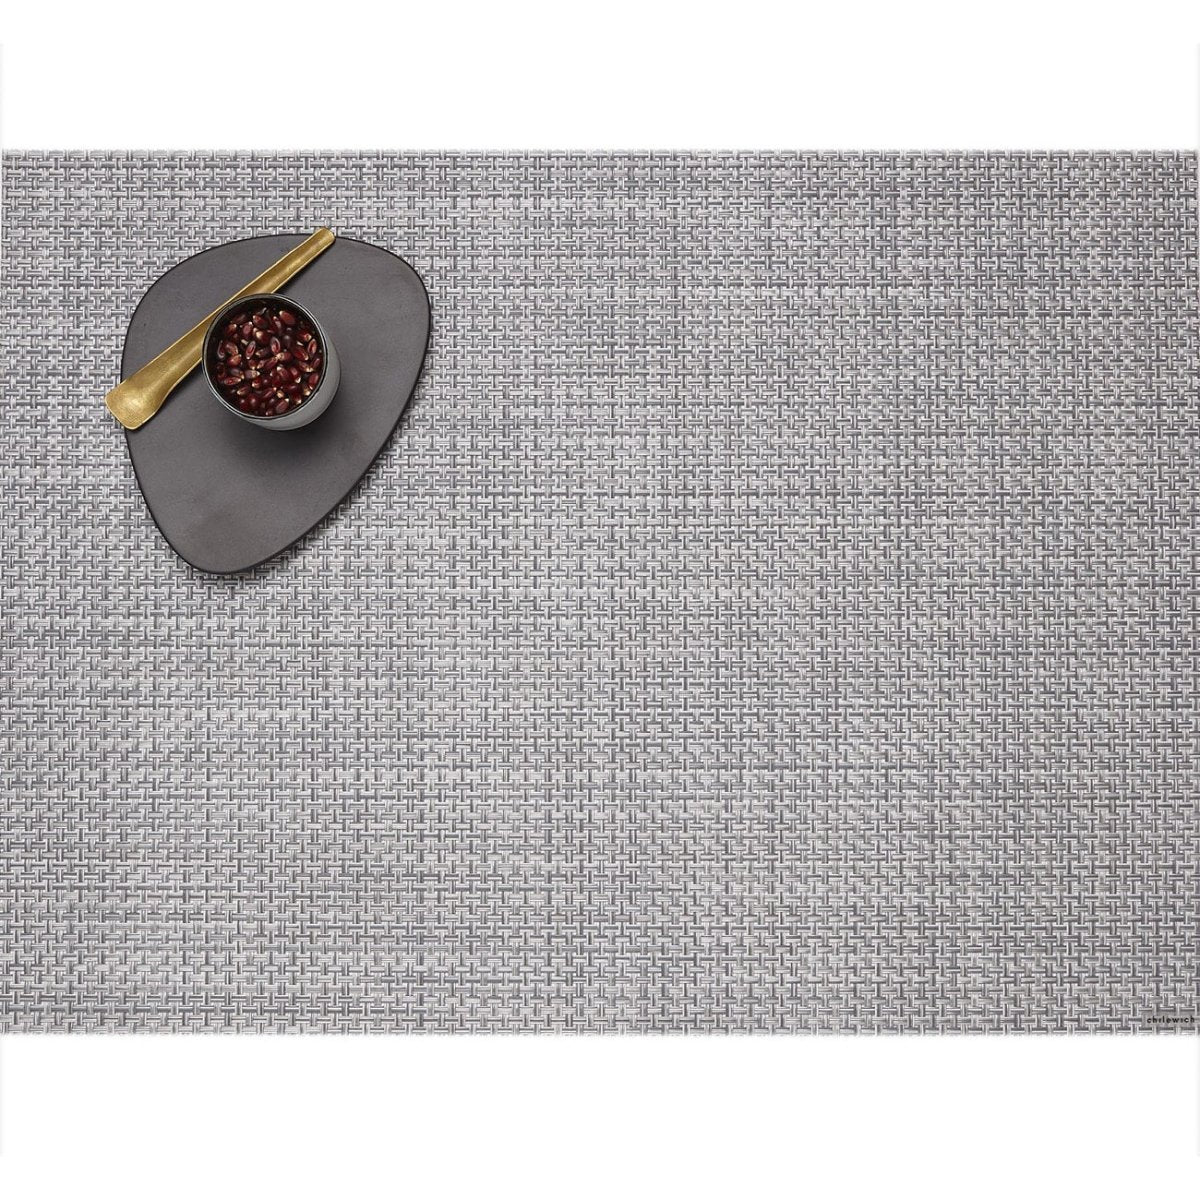 Chilewich Basketweave Rectangular Placemat - lily & onyx